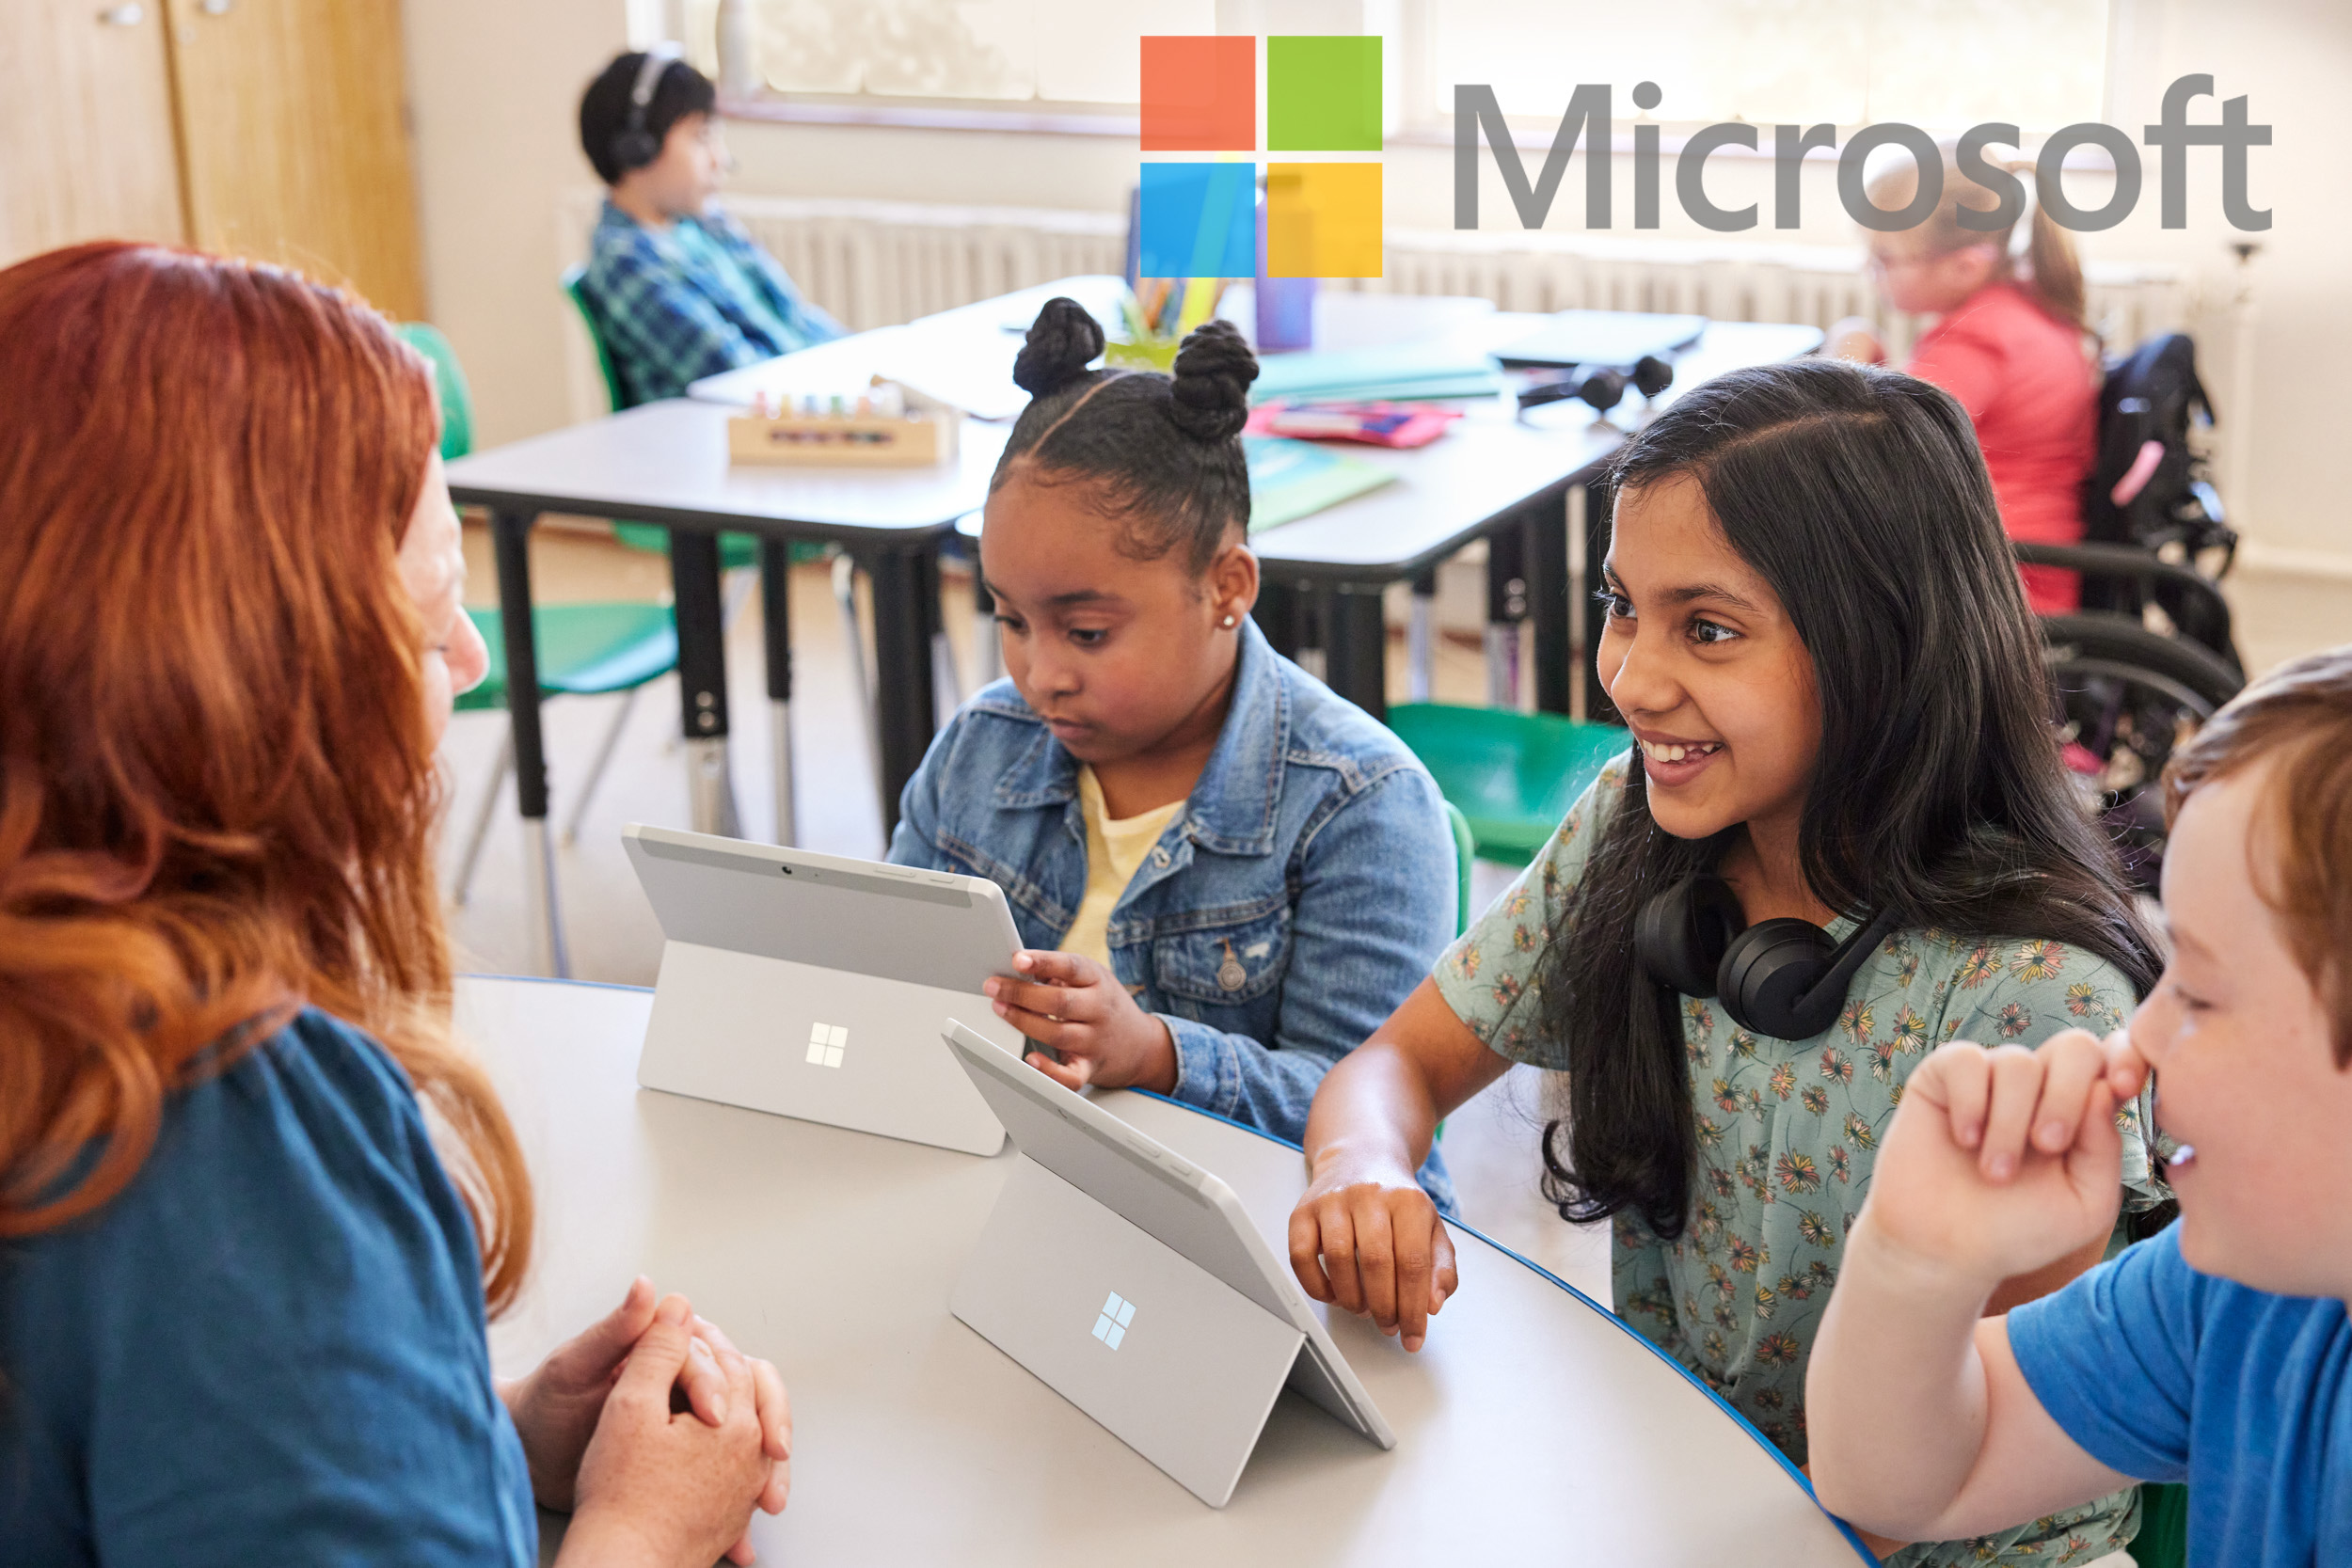 A middle school student works in a group setting in a Microsoft Ad Campaign photographed by Lifestyle Photographer Diana Mulvihill